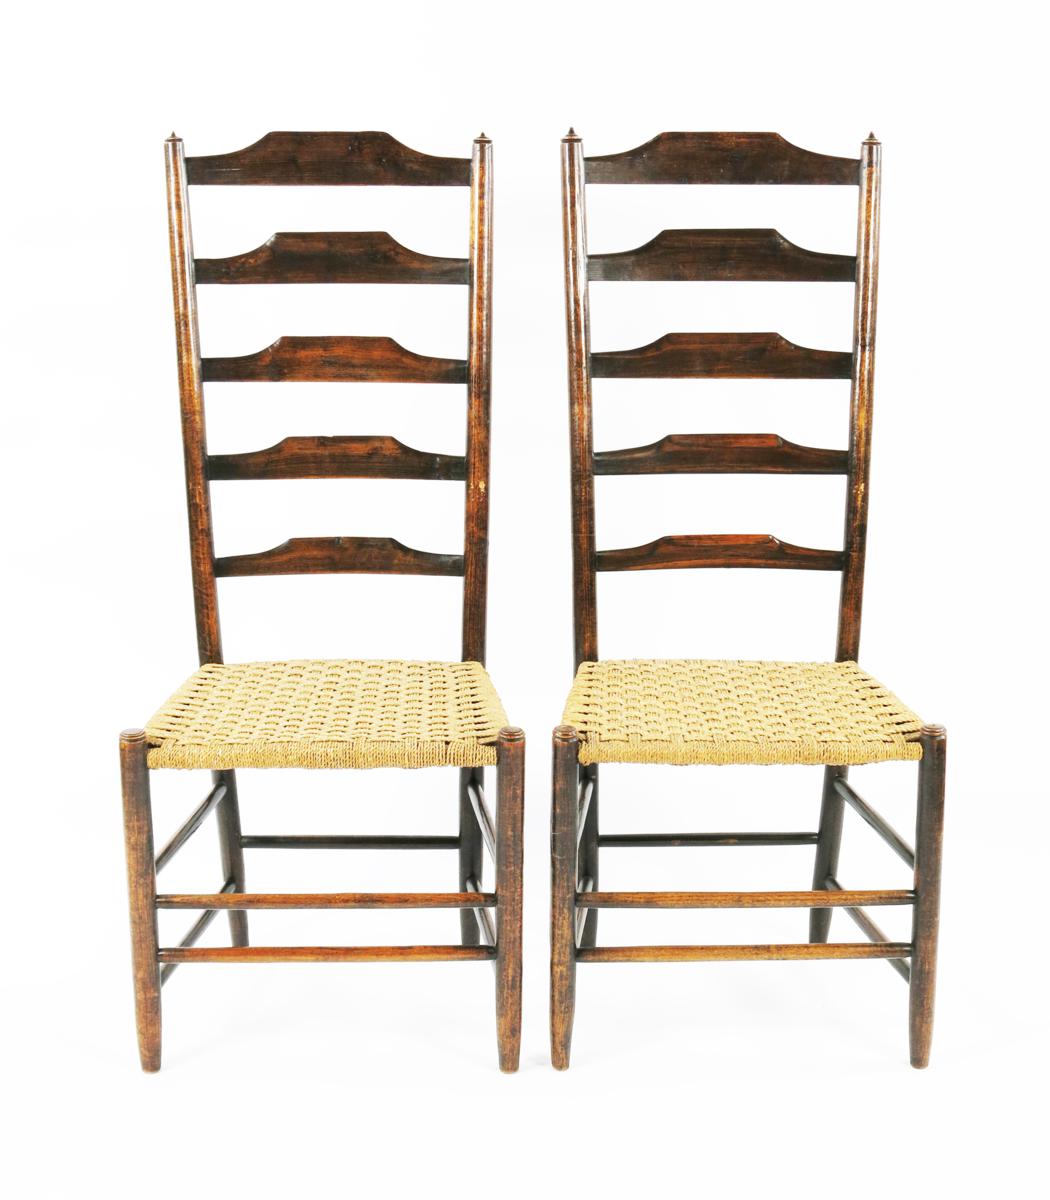 A set of six Clissett High Back ladder-back chairs designed by Ernest Gimson, with strung seats, - Image 2 of 3